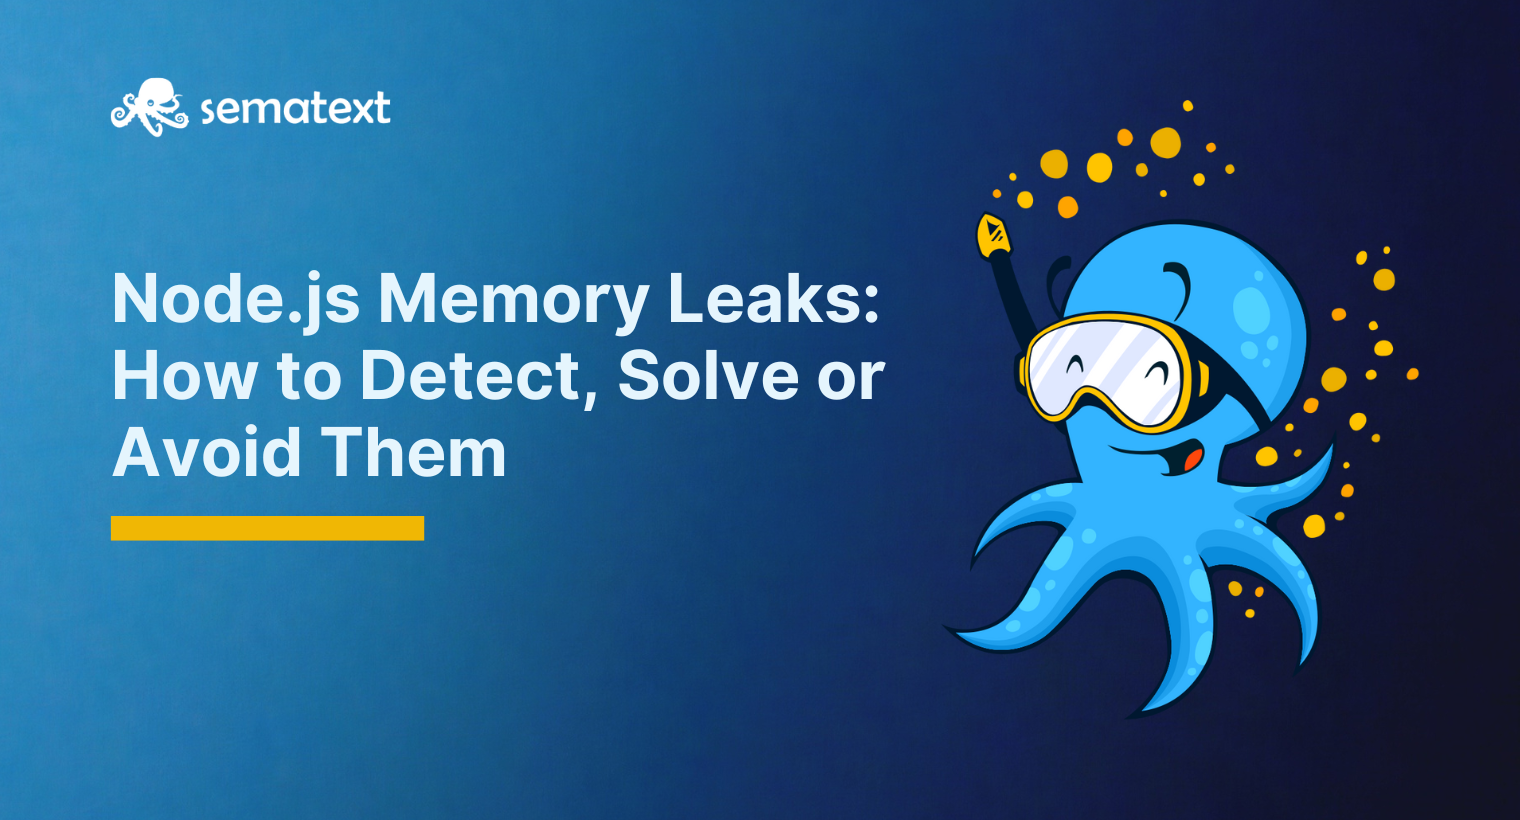 Debugging Node.js Memory Leaks: How to Detect, Solve or Avoid Them in Applications